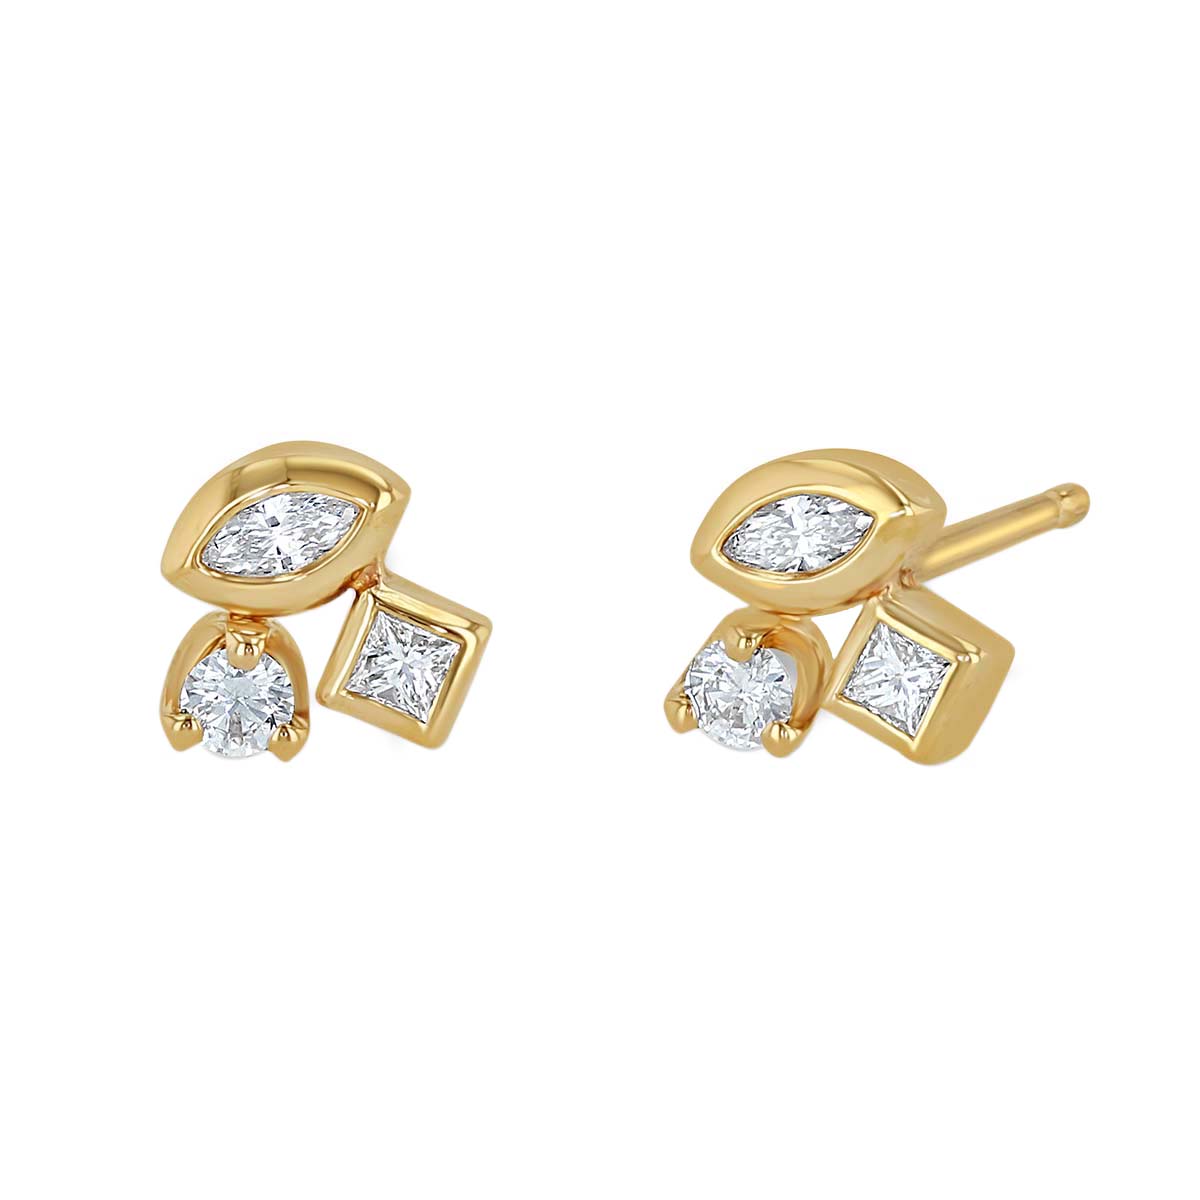 Zoe Chicco Mixed Cut Diamond Cluster Stud Earrings in Yellow Gold ...